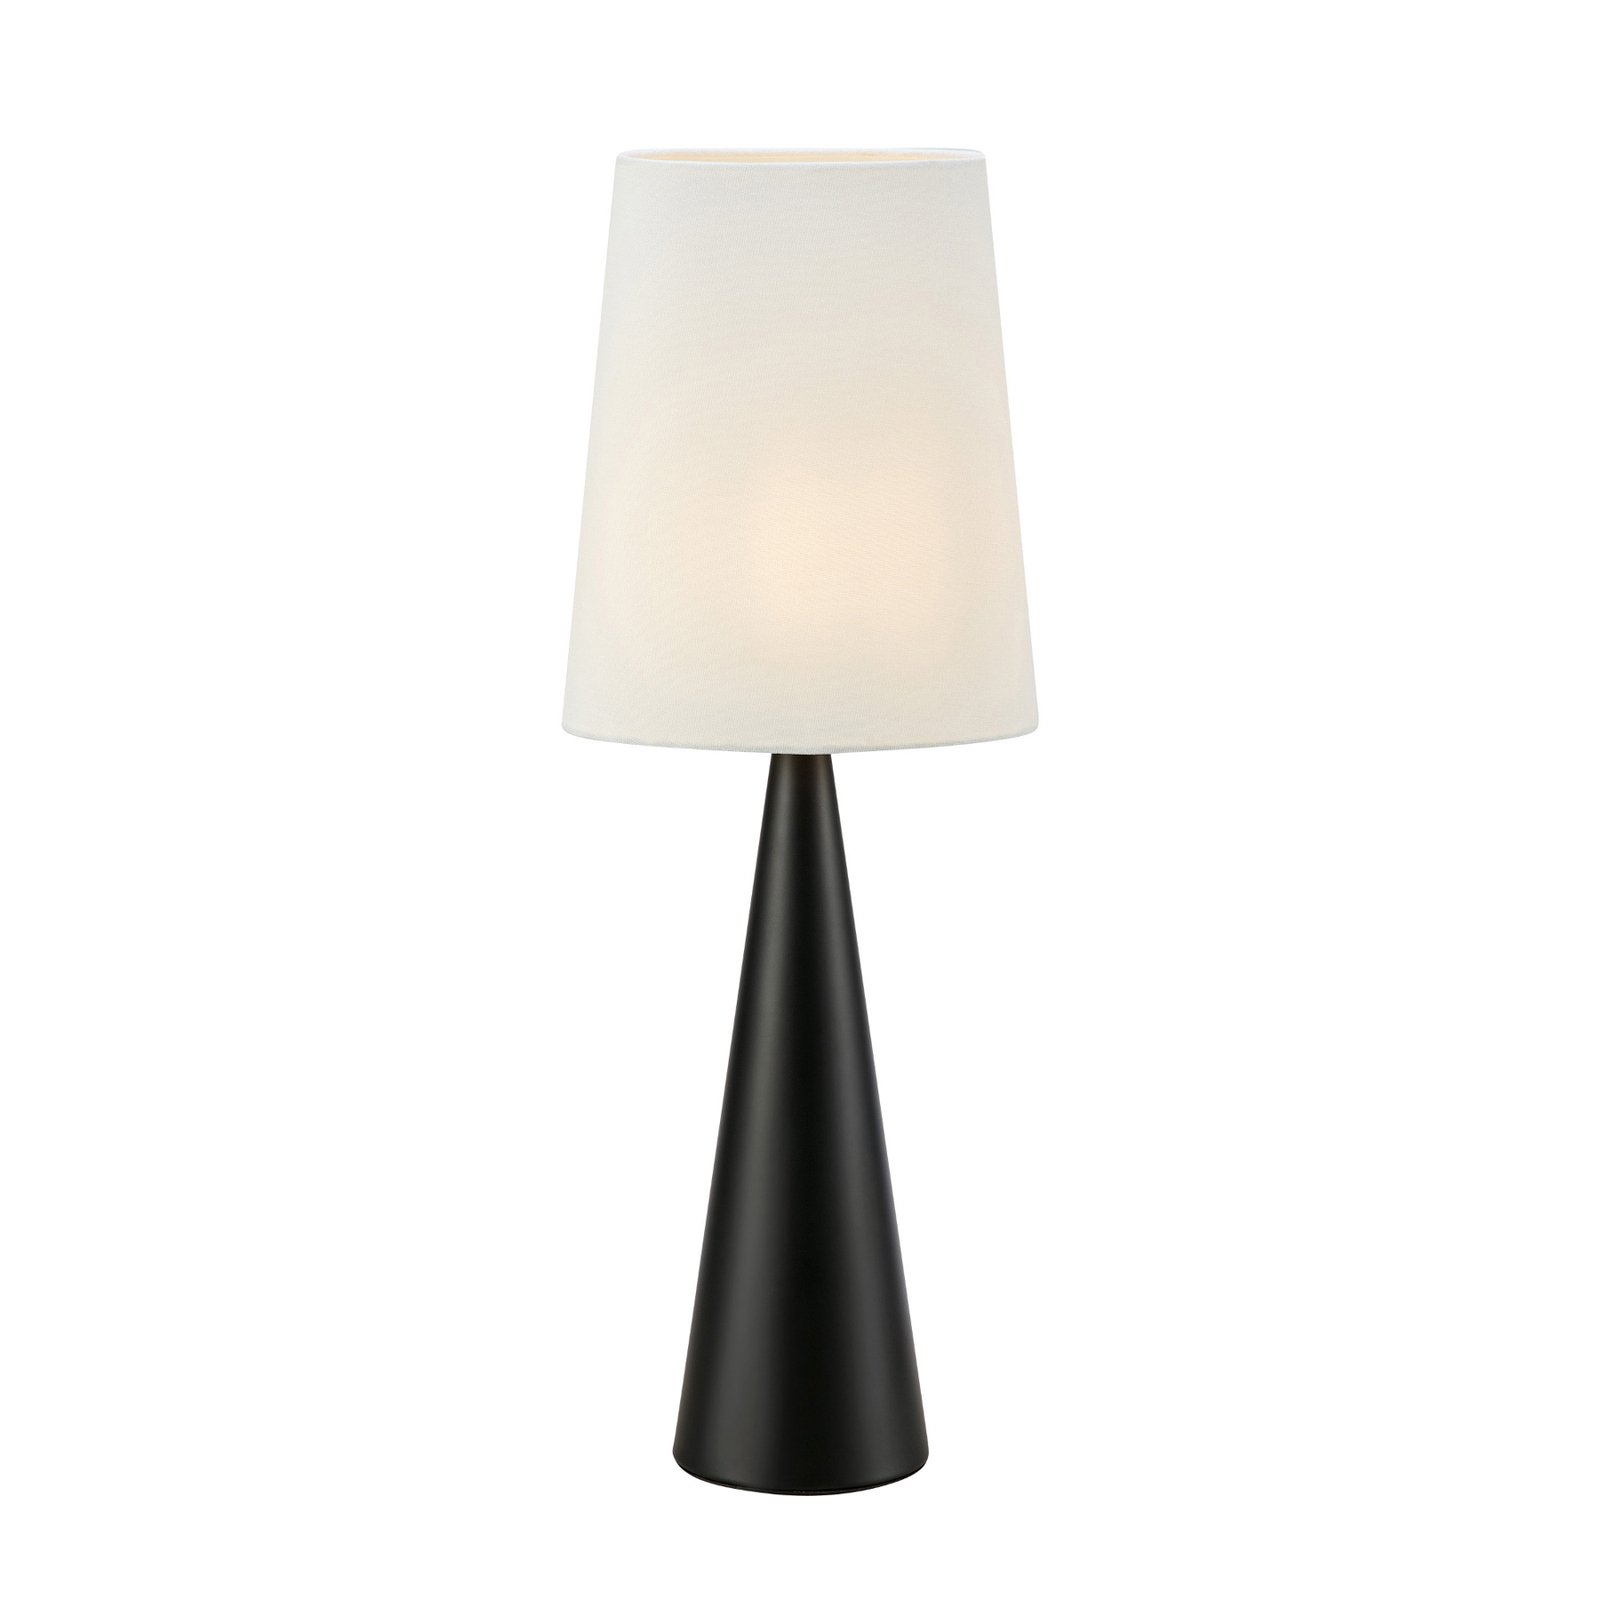 Conus table lamp with off-white lampshade, black